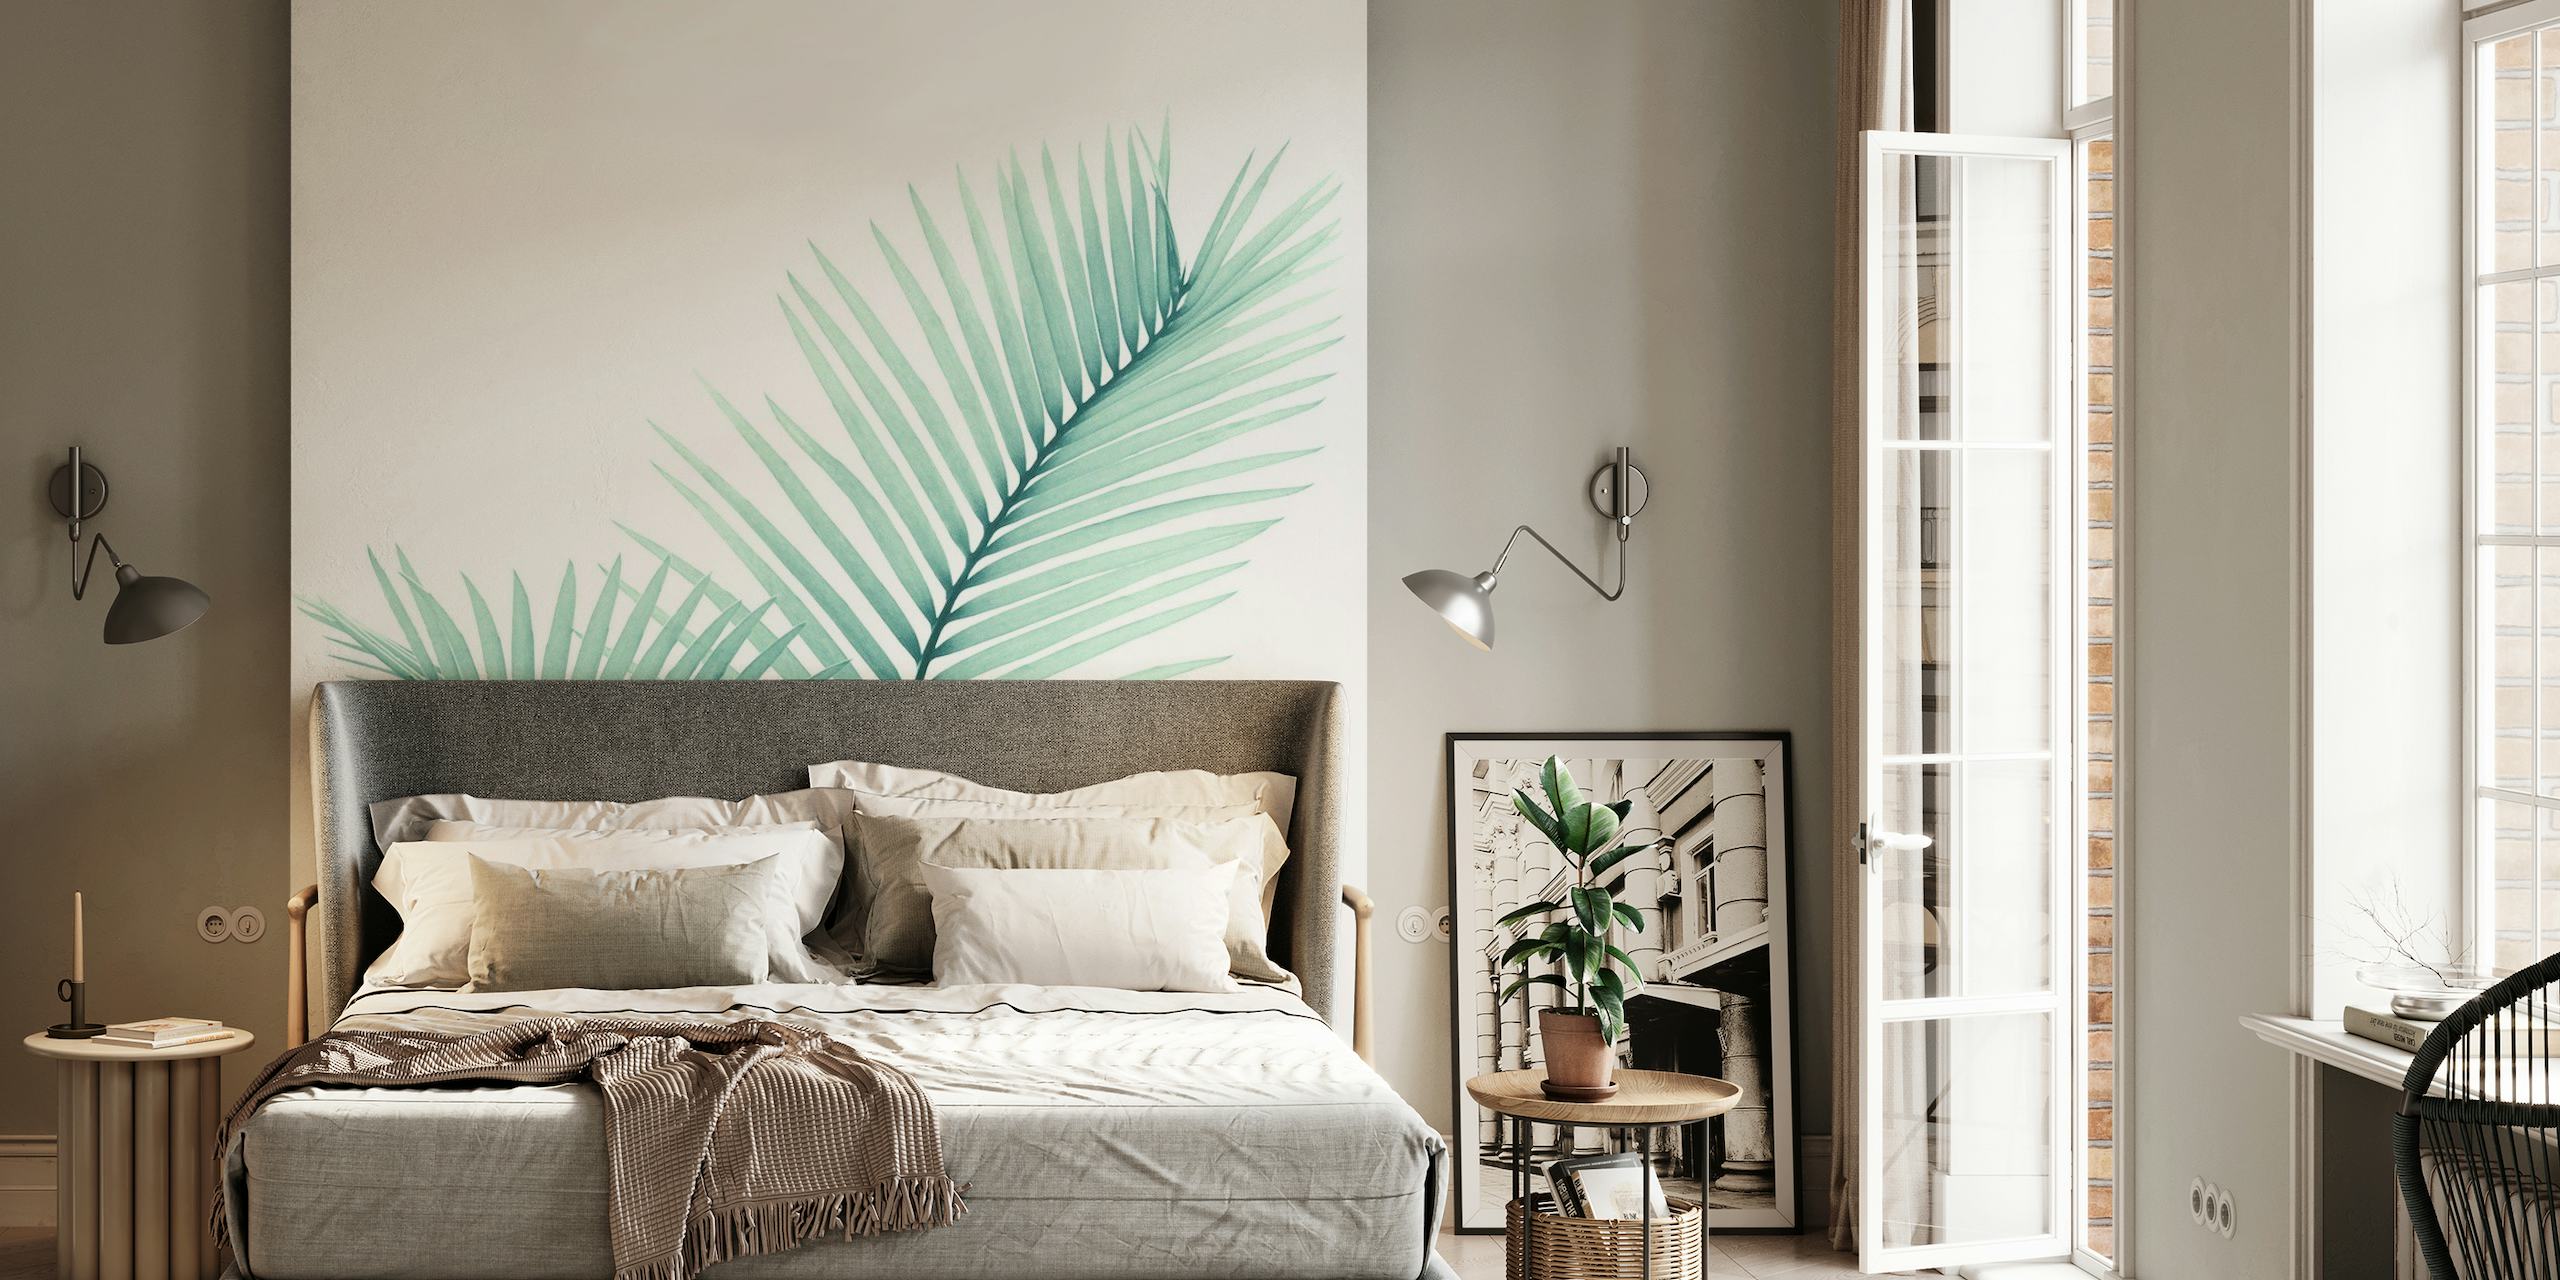 Intertwined Palm Leaves 3 behang